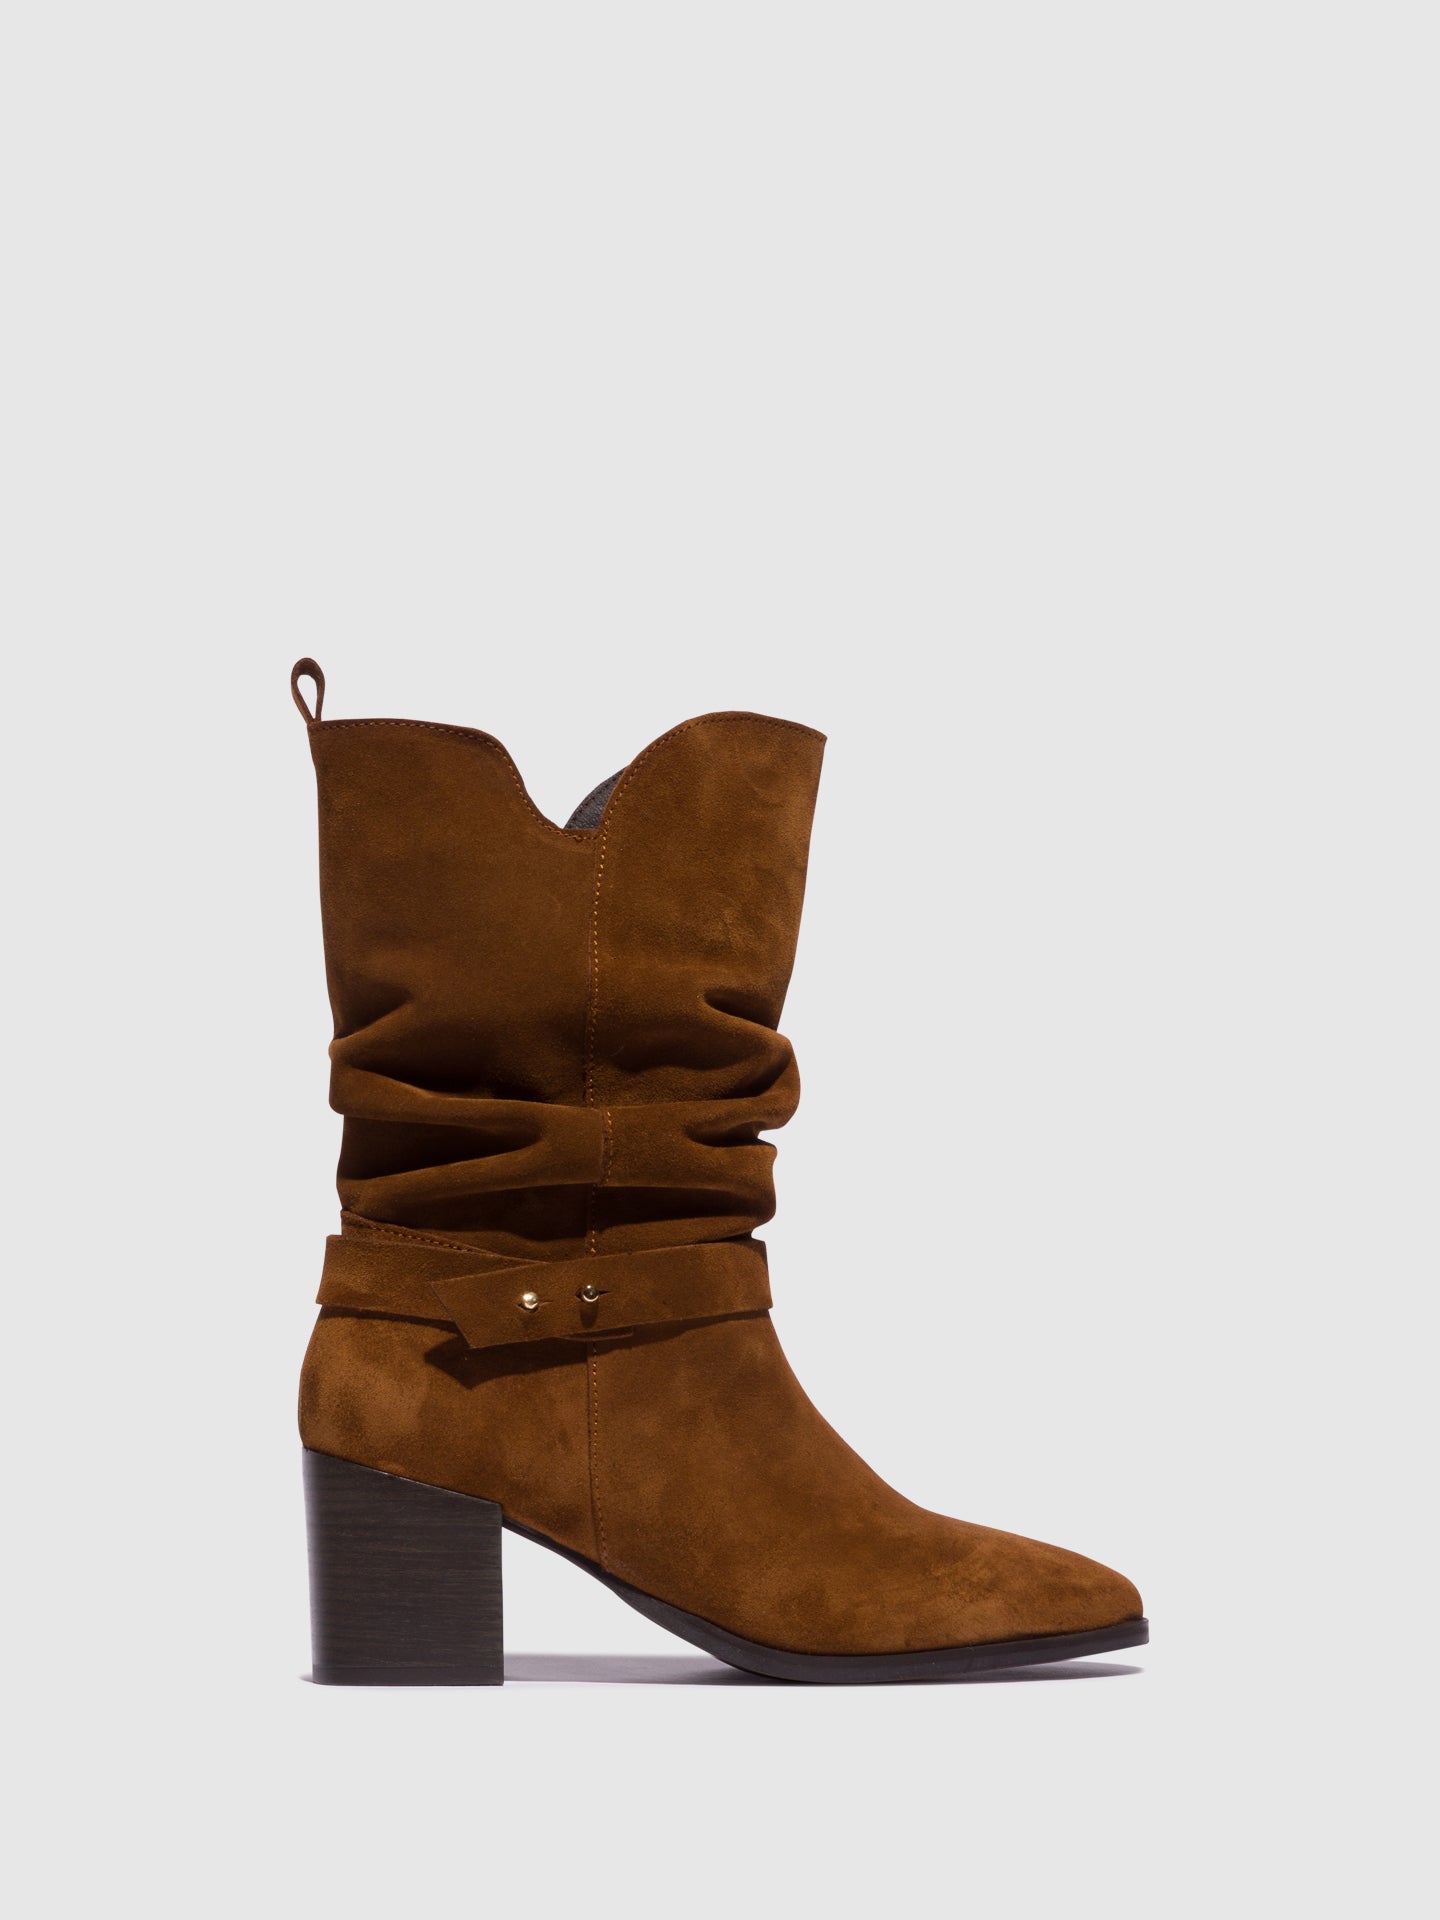 Foreva Camel Pointed Toe Boots